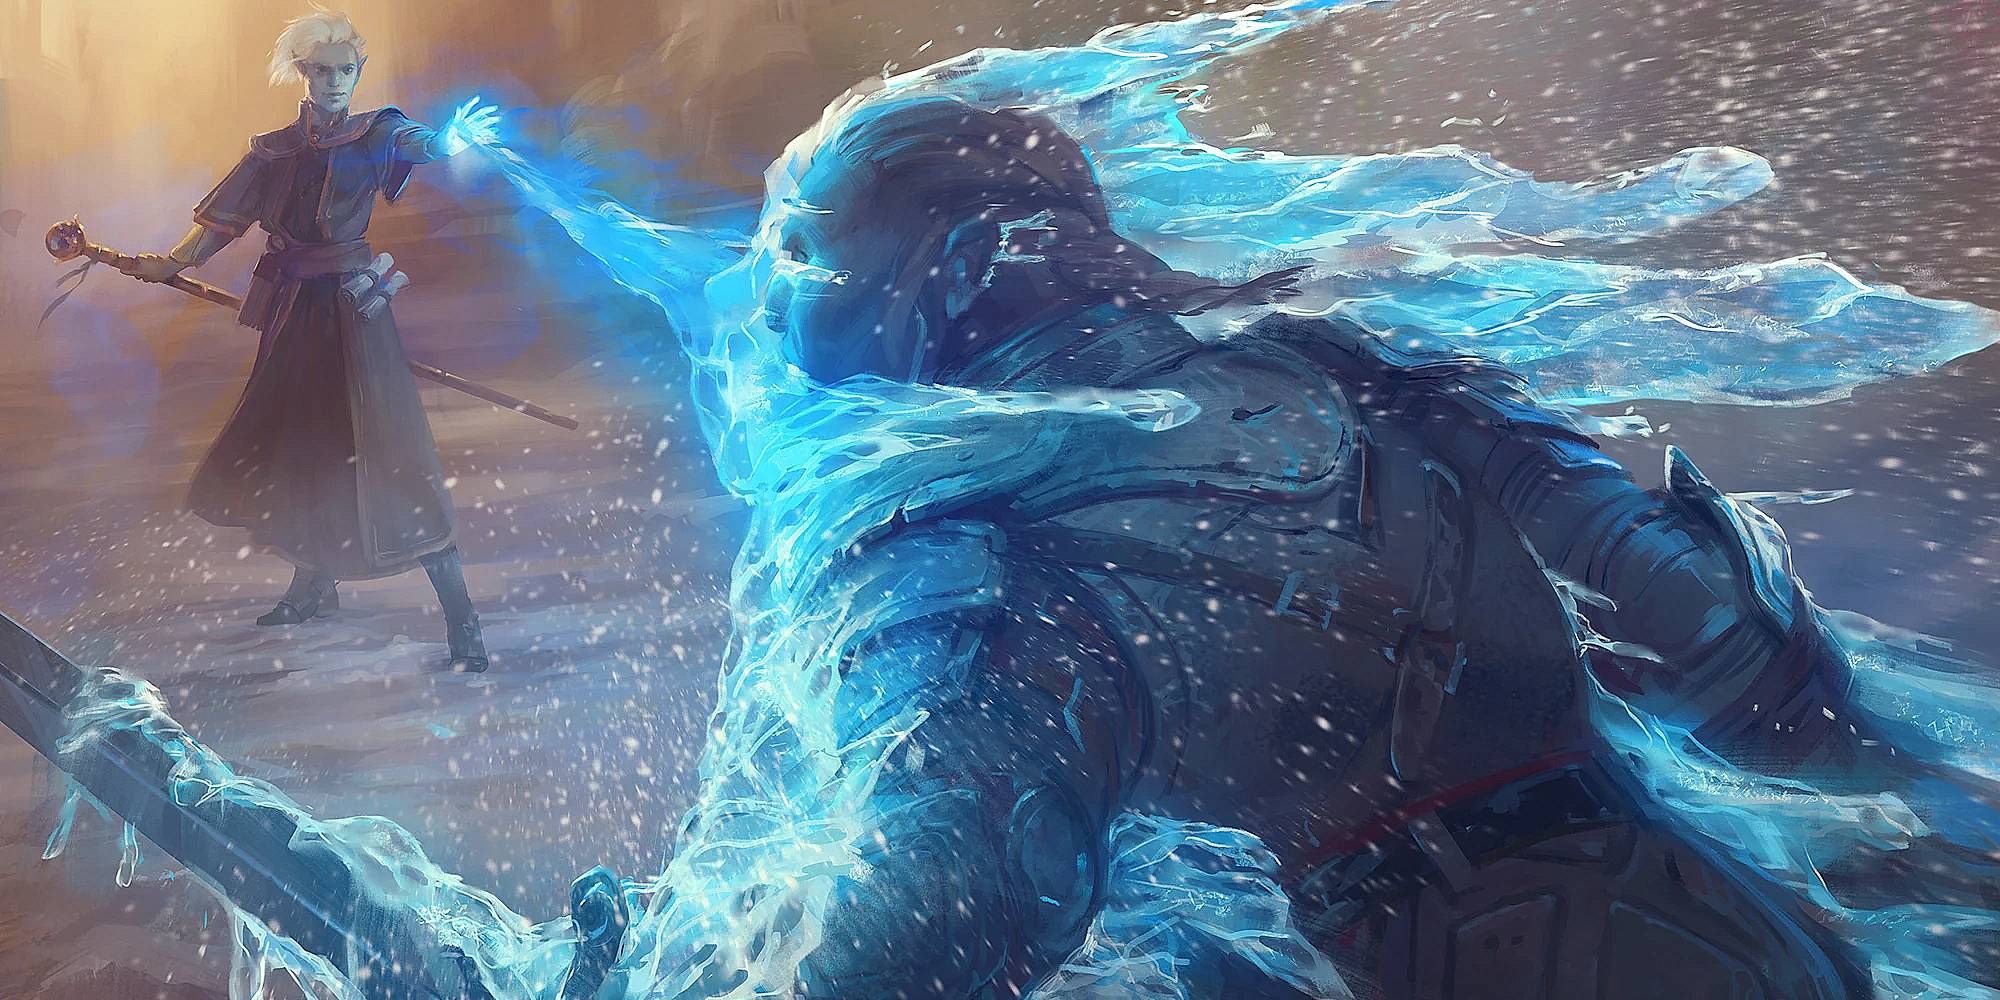 A Drow sends a cold beam of frost that freezes its enemy